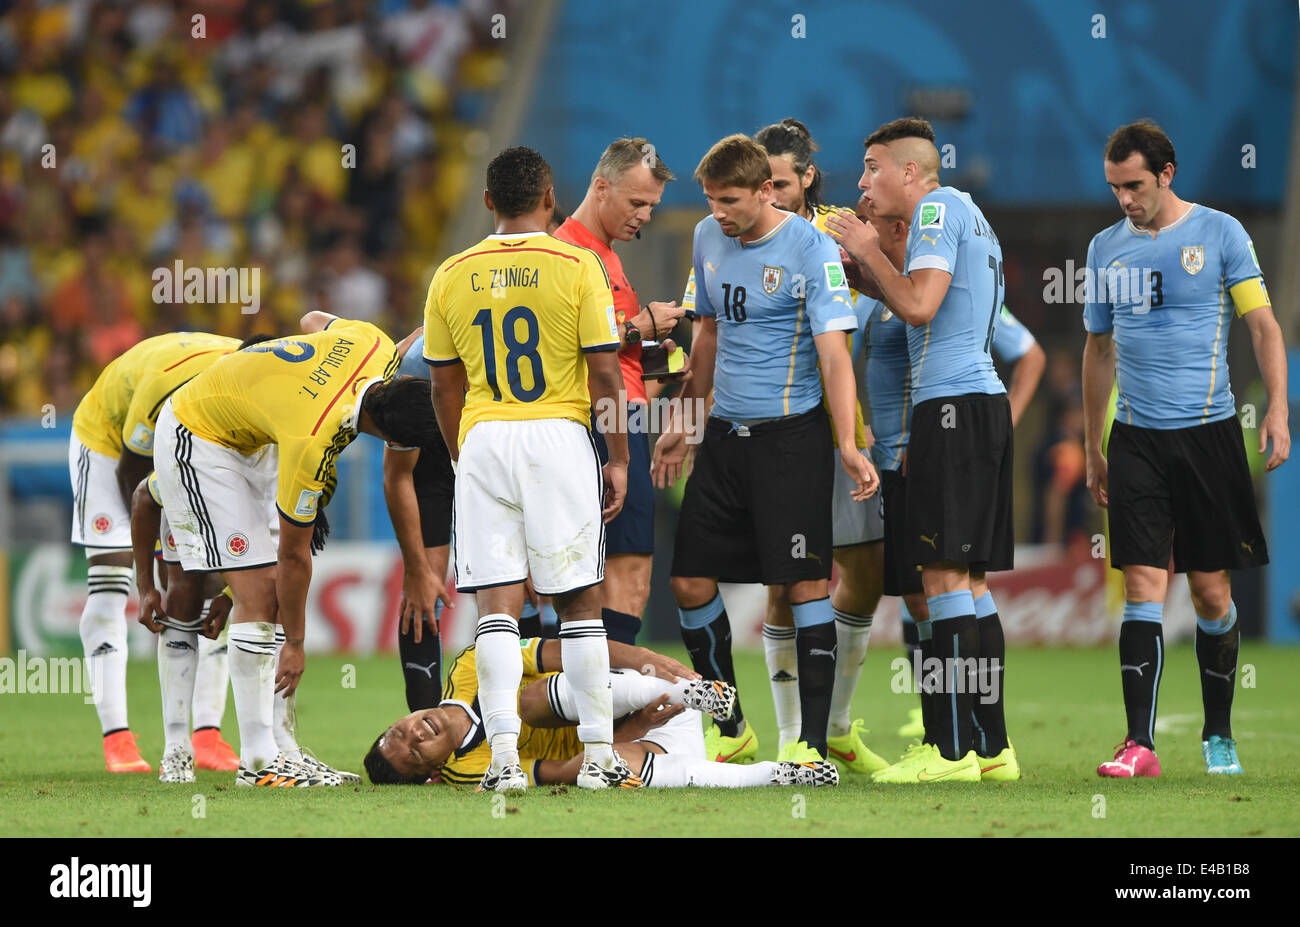 Rio De Janeiro, Brazil. 28th June, 2014. Teofilo Gutierrez (COL) Football/Soccer : Teofilo Gutierrez Colombia lies on the pitch during the FIFA World Cup Brazil 2014 Round of 16 match between Colombia 2-0 Uruguay at Estadio do Maracana in Rio De Janeiro, Brazil . © SONG Seak-In/AFLO/Alamy Live News Stock Photo